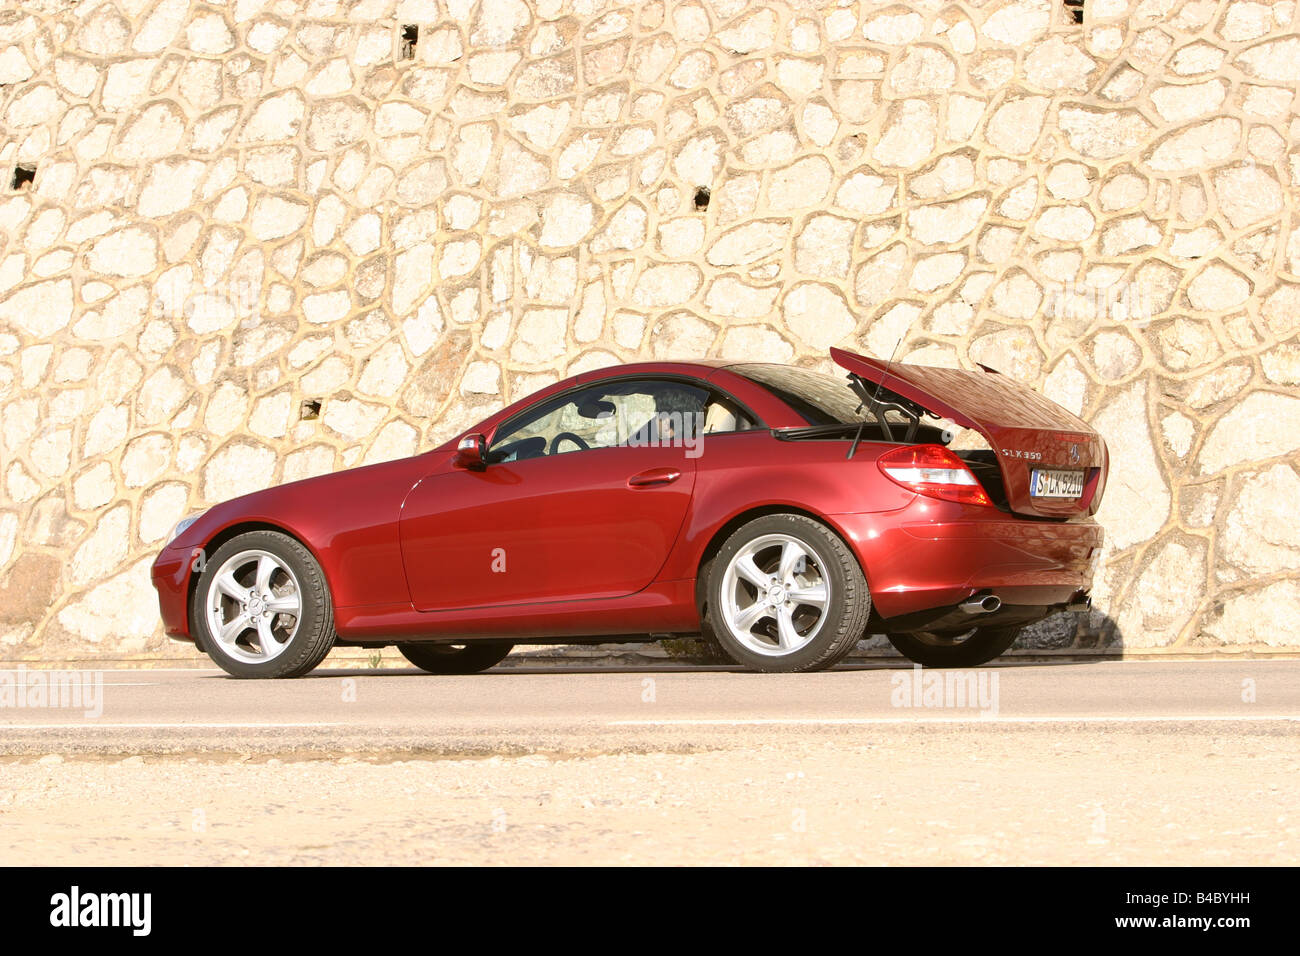 Car, Mercedes SLK 350, Convertible, model year 2004-, red, standing,  upholding, diagonal from the back, side view, photographer Stock Photo -  Alamy